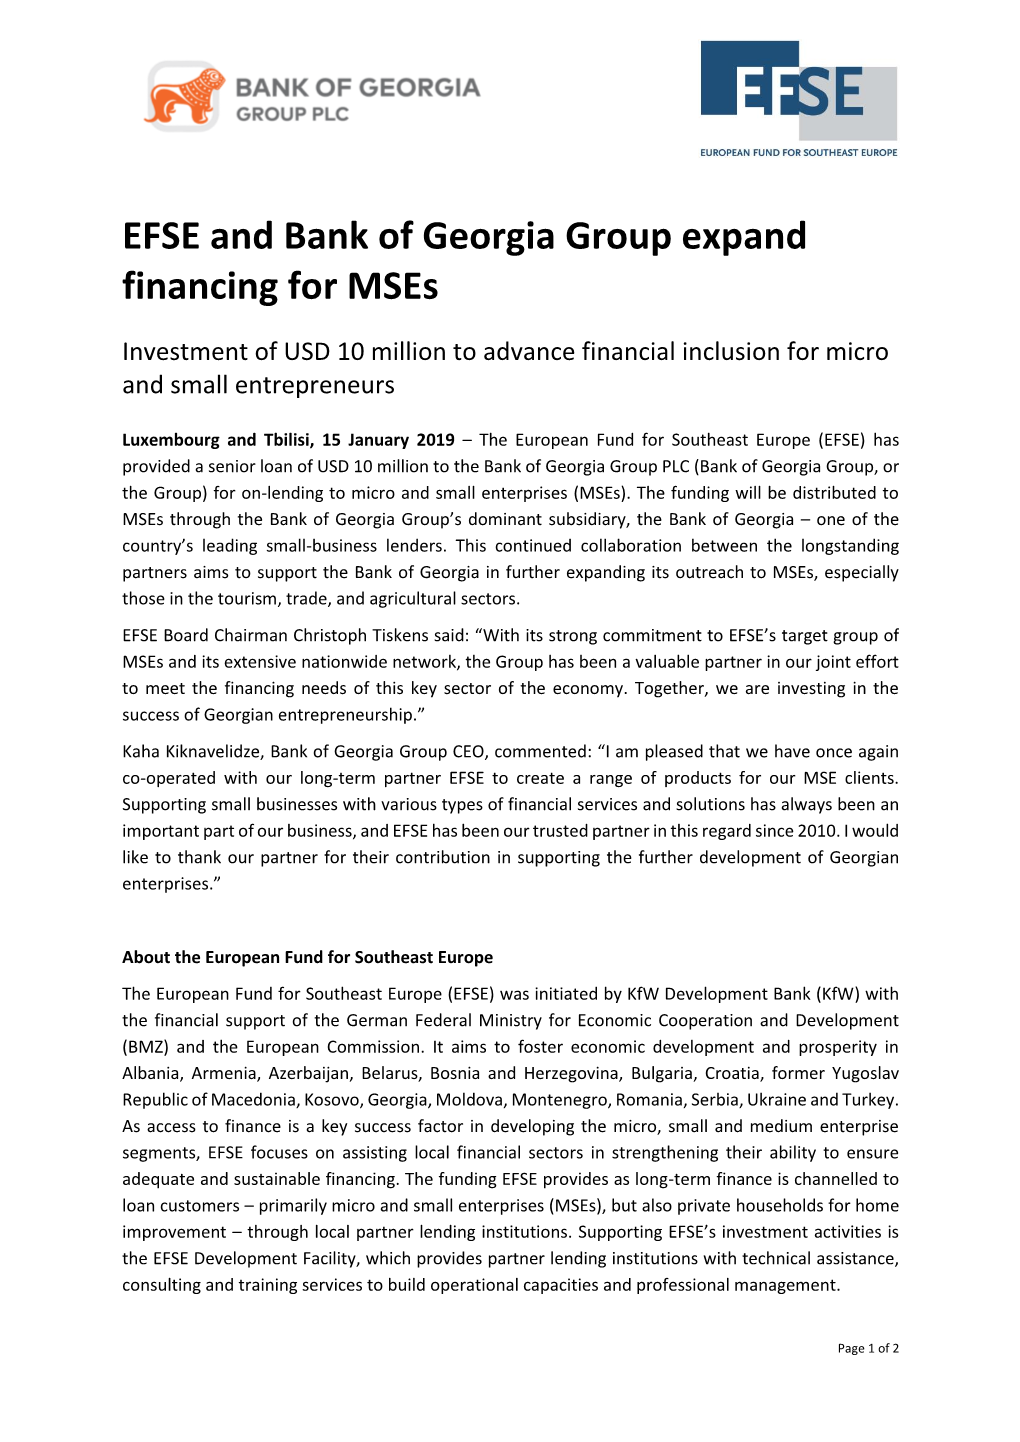 EFSE and Bank of Georgia Group Expand Financing for Mses